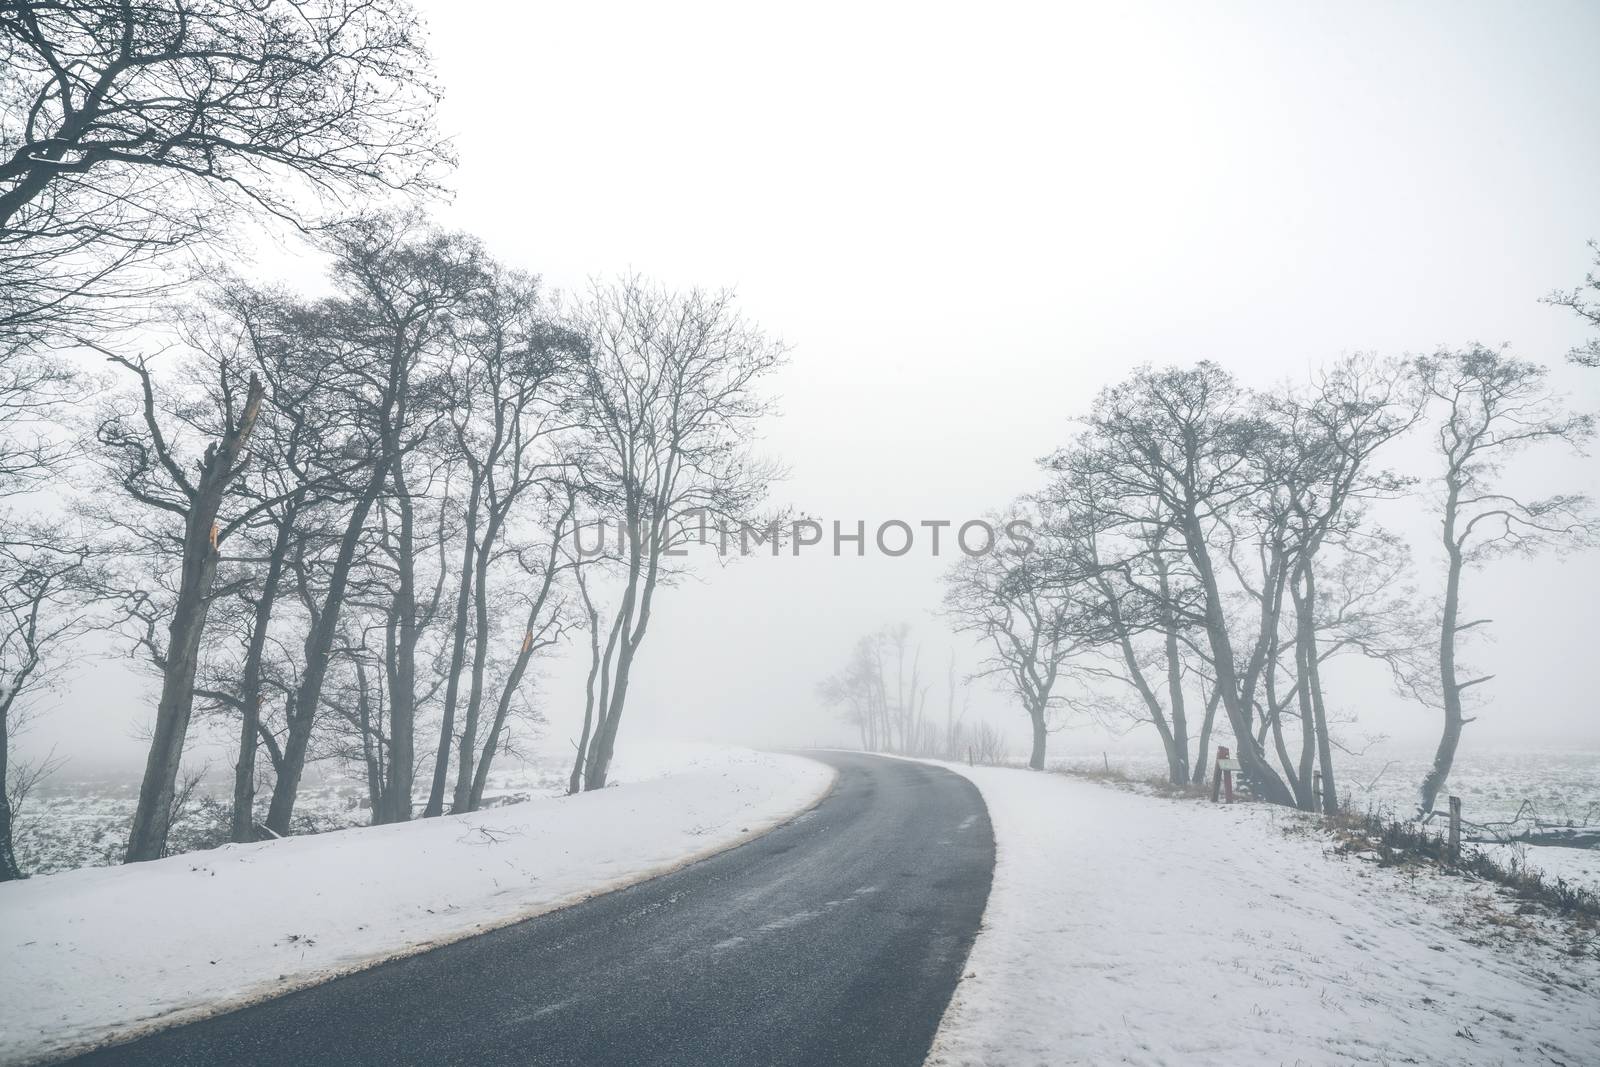 Highway curvy road in a misty winter scenery by Sportactive